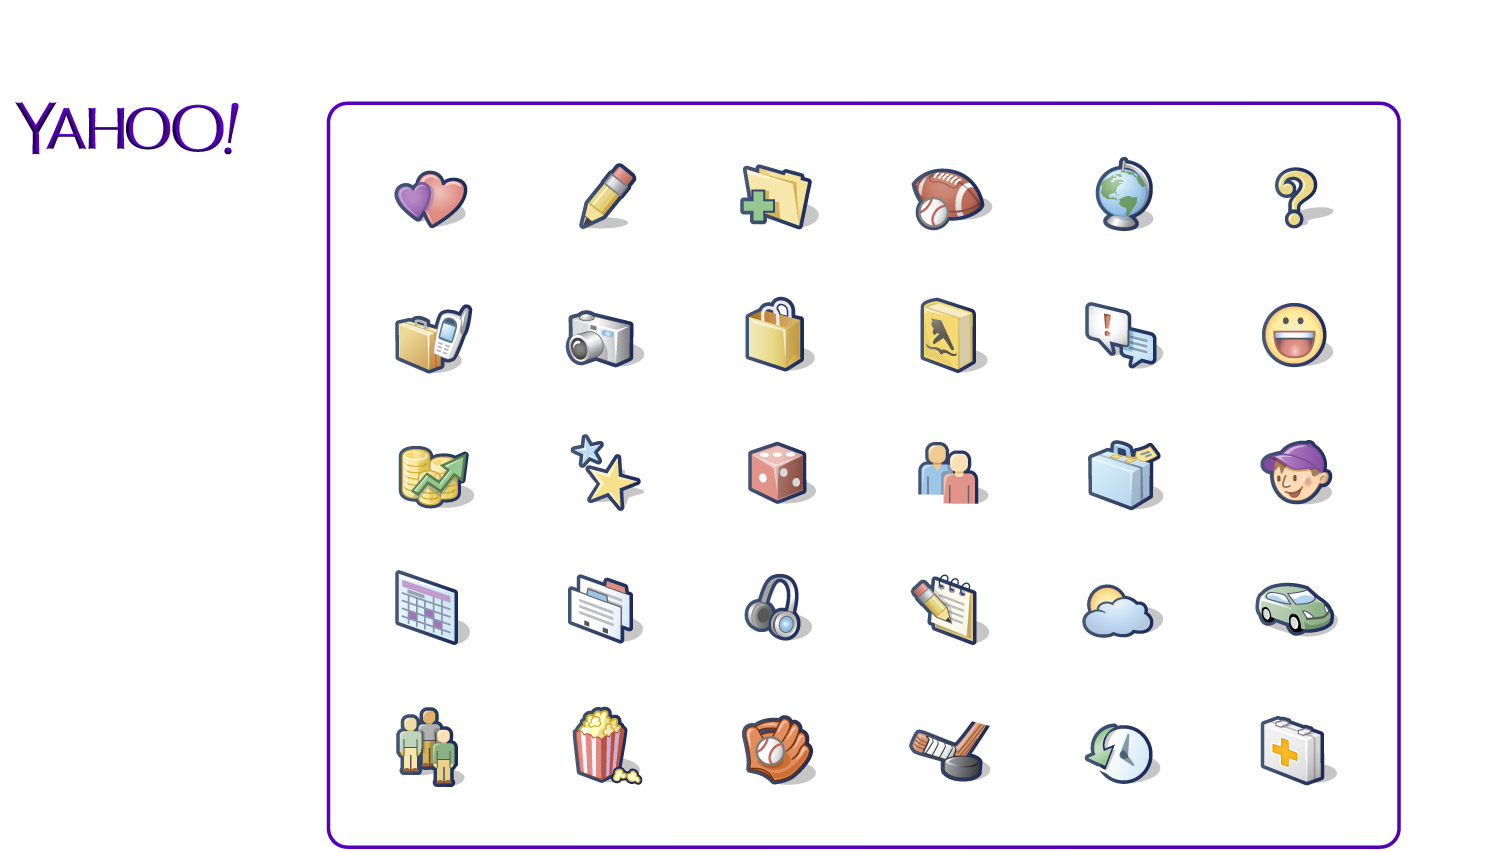 Icons for Yahoo!